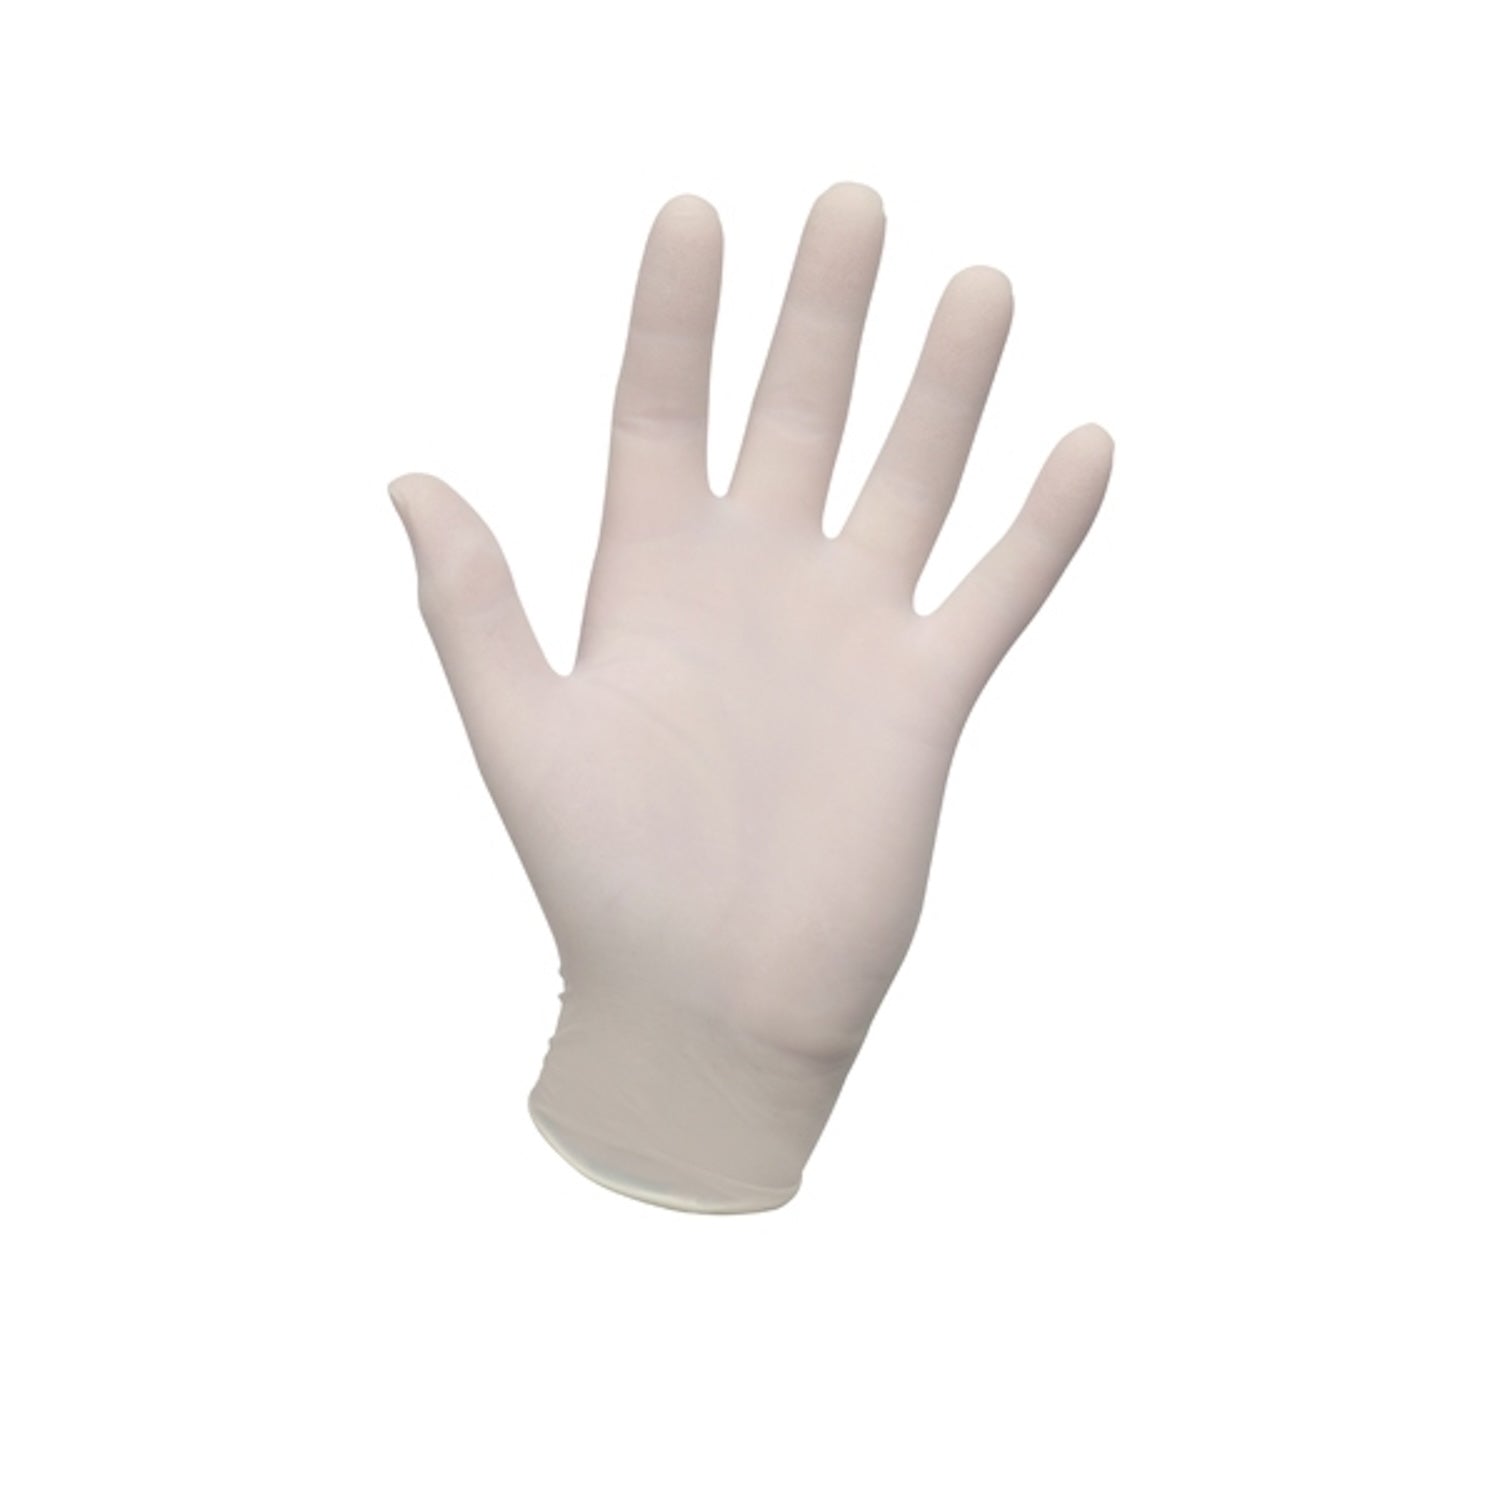 Shermond Premier Protector Latex Gloves | Large | Pack of 100 pieces (1)